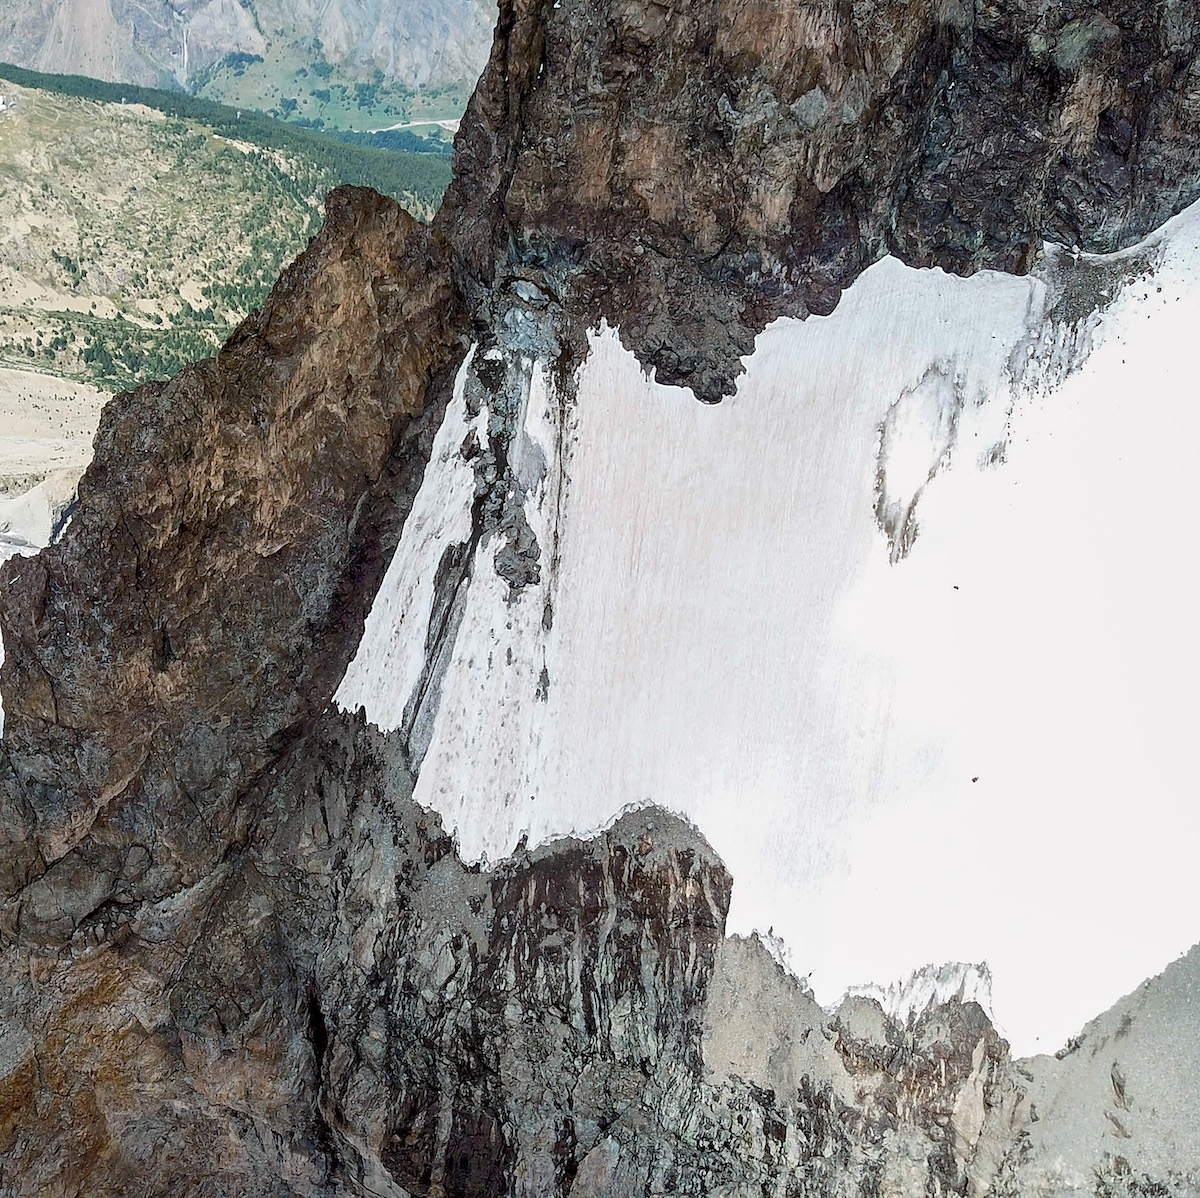 The rockfall zone on the Glacier Carre on August 19, 2018, 12 days after two pillars broke and caused a massive debris slide. [Photo] Benjamin Ribeyre, with a drone and special authorization from Parc national des Ecrins